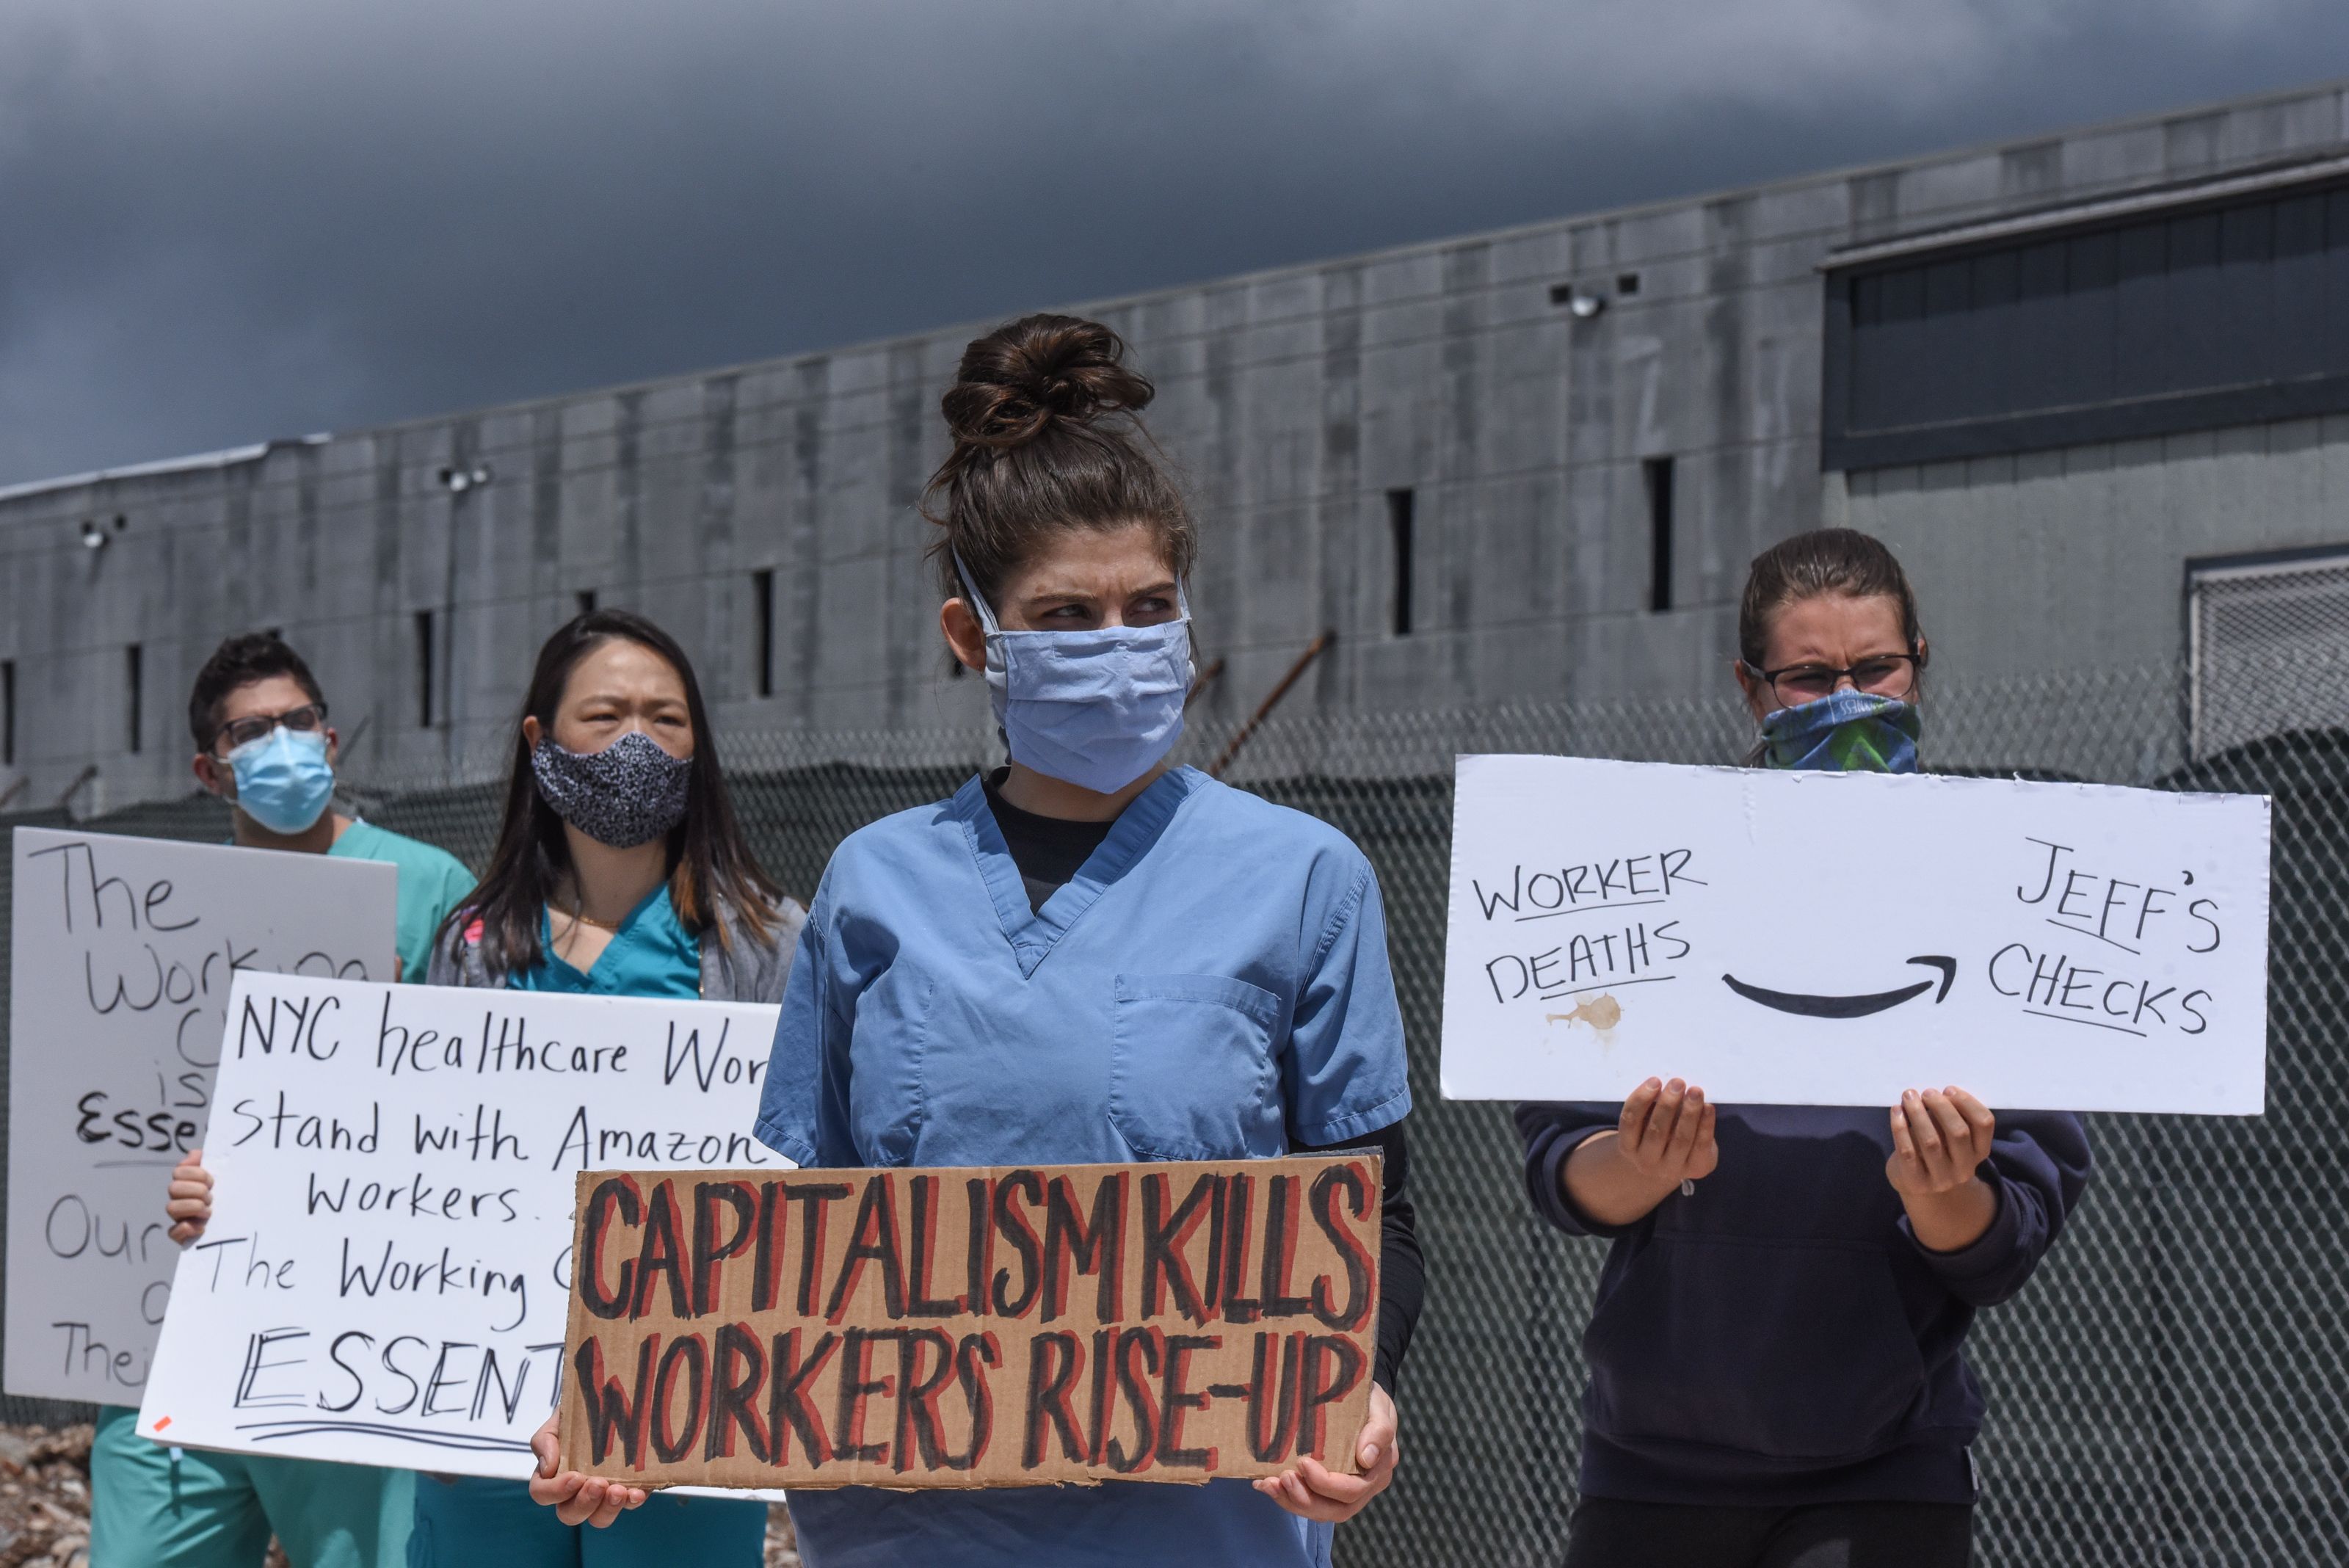 In this photo, several signs read: "Capitalism kills workers rise-up" and "Worker deaths arrow Jeff's checks"